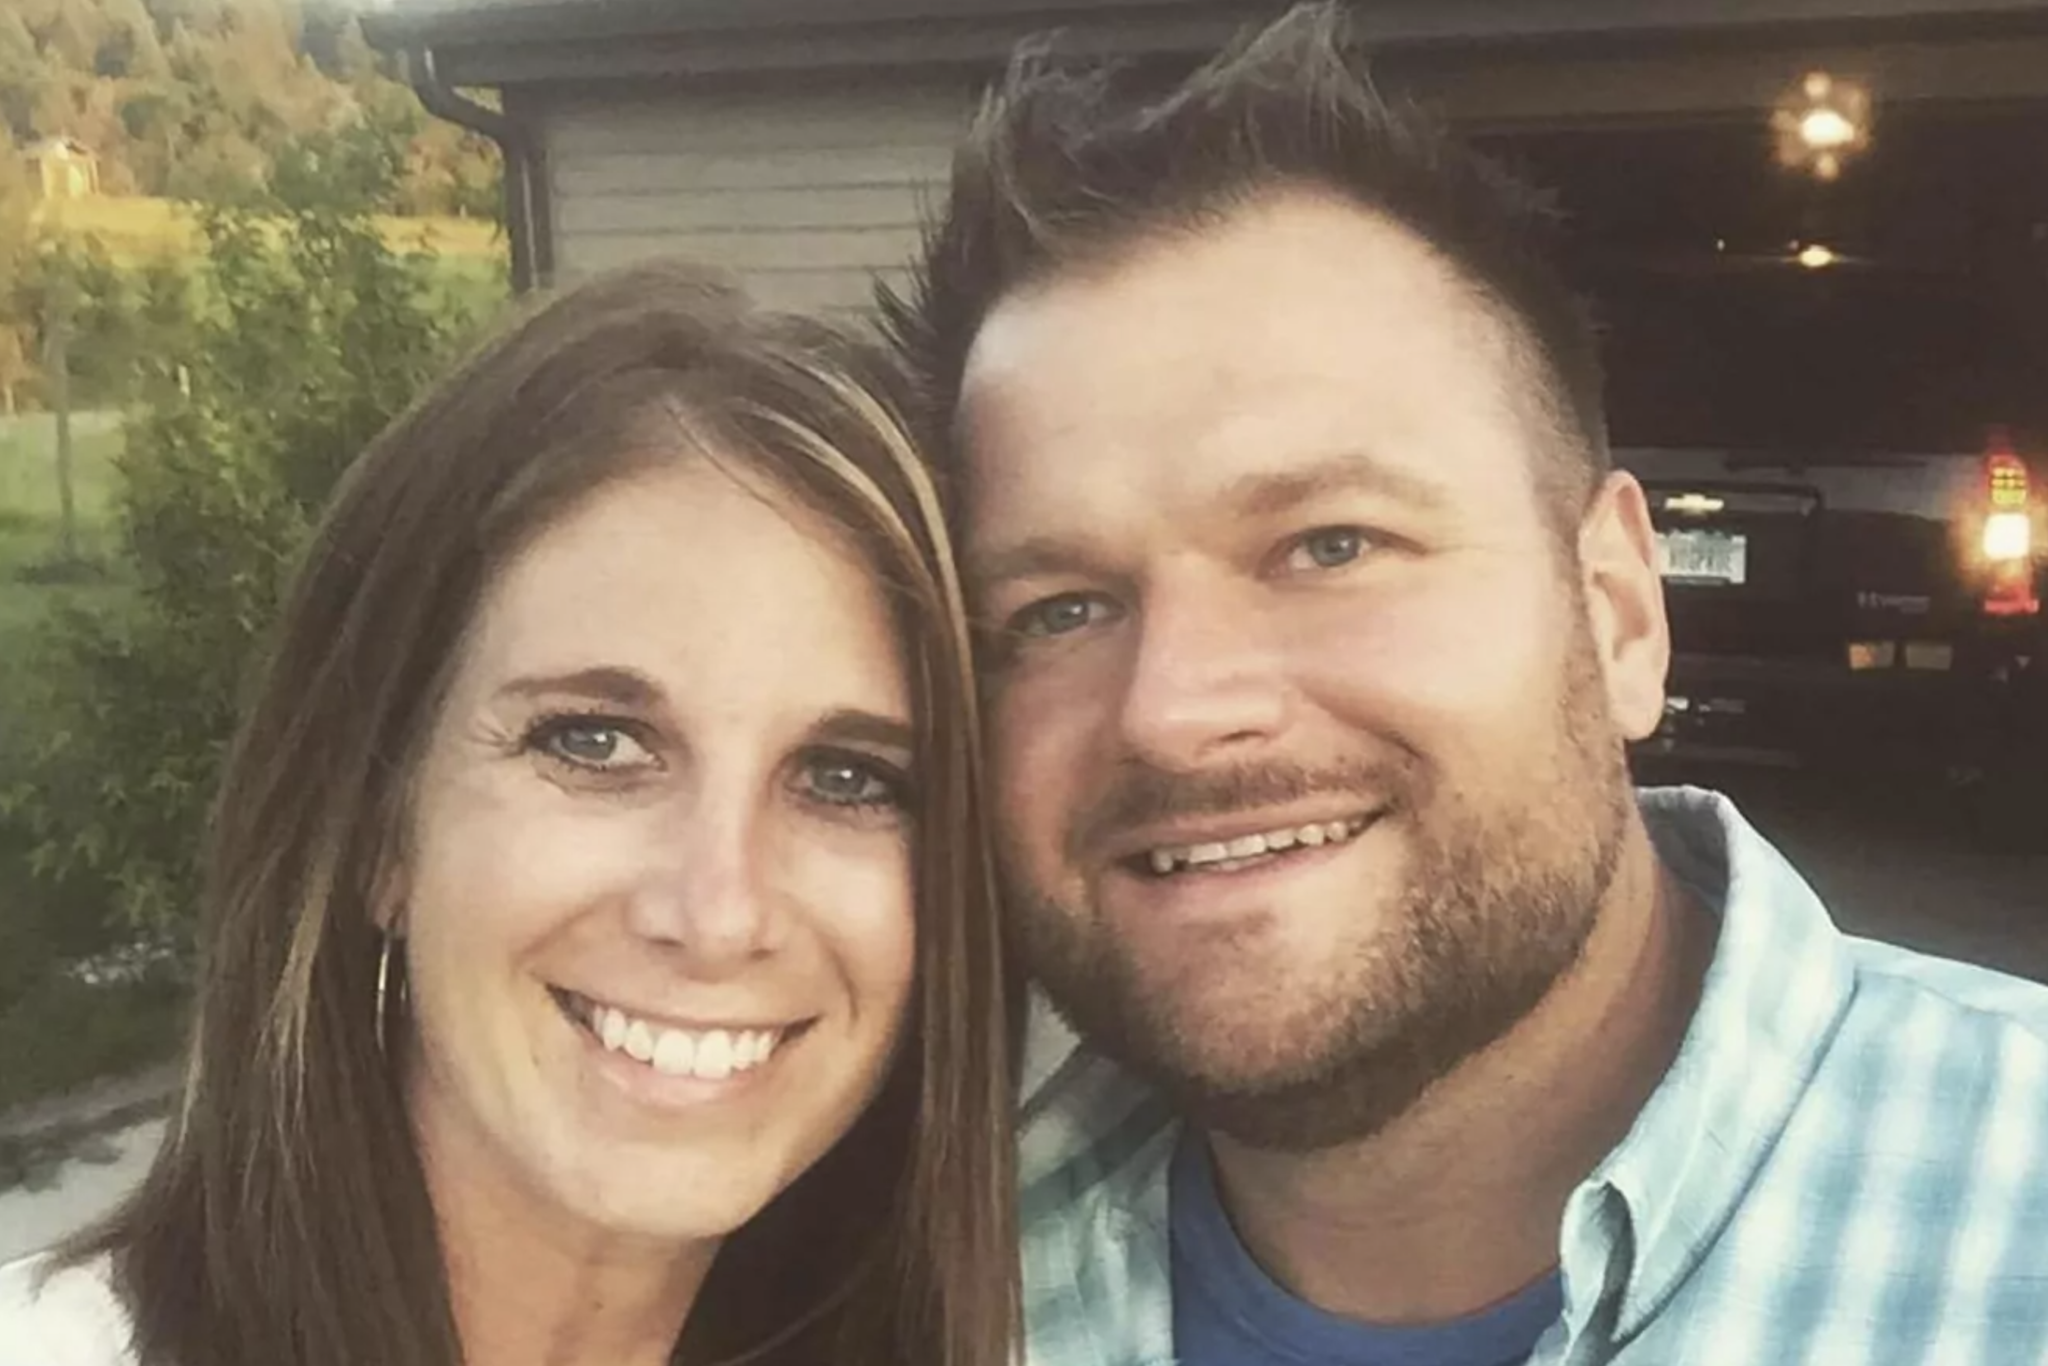 Matt Ulrichs wifes emotional farewell: We all want you back for just one more day